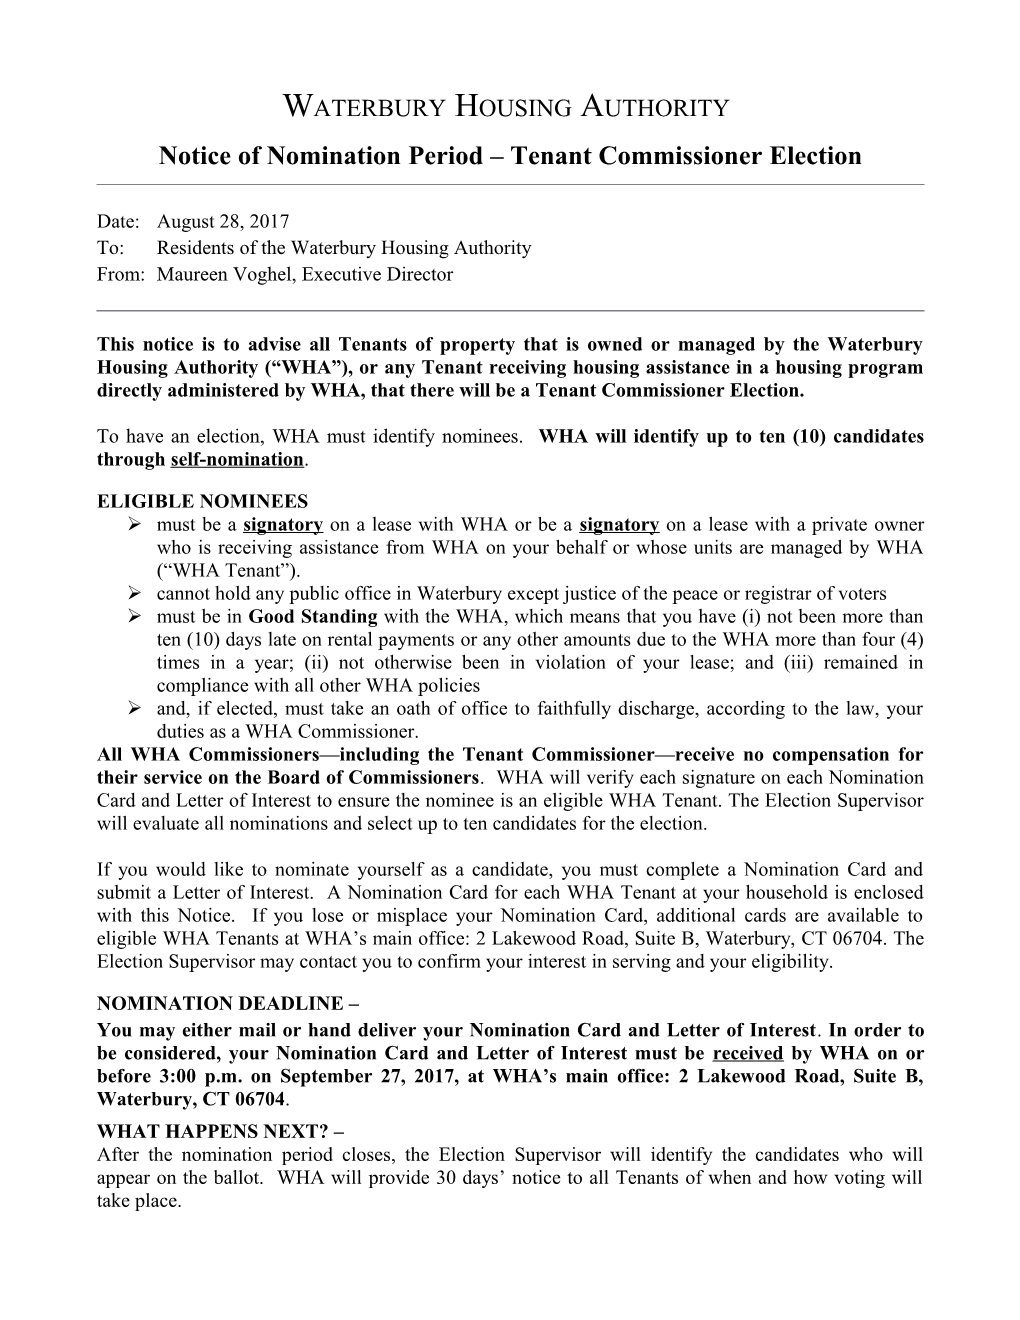 Notice of Nomination Period Tenant Commissioner Election